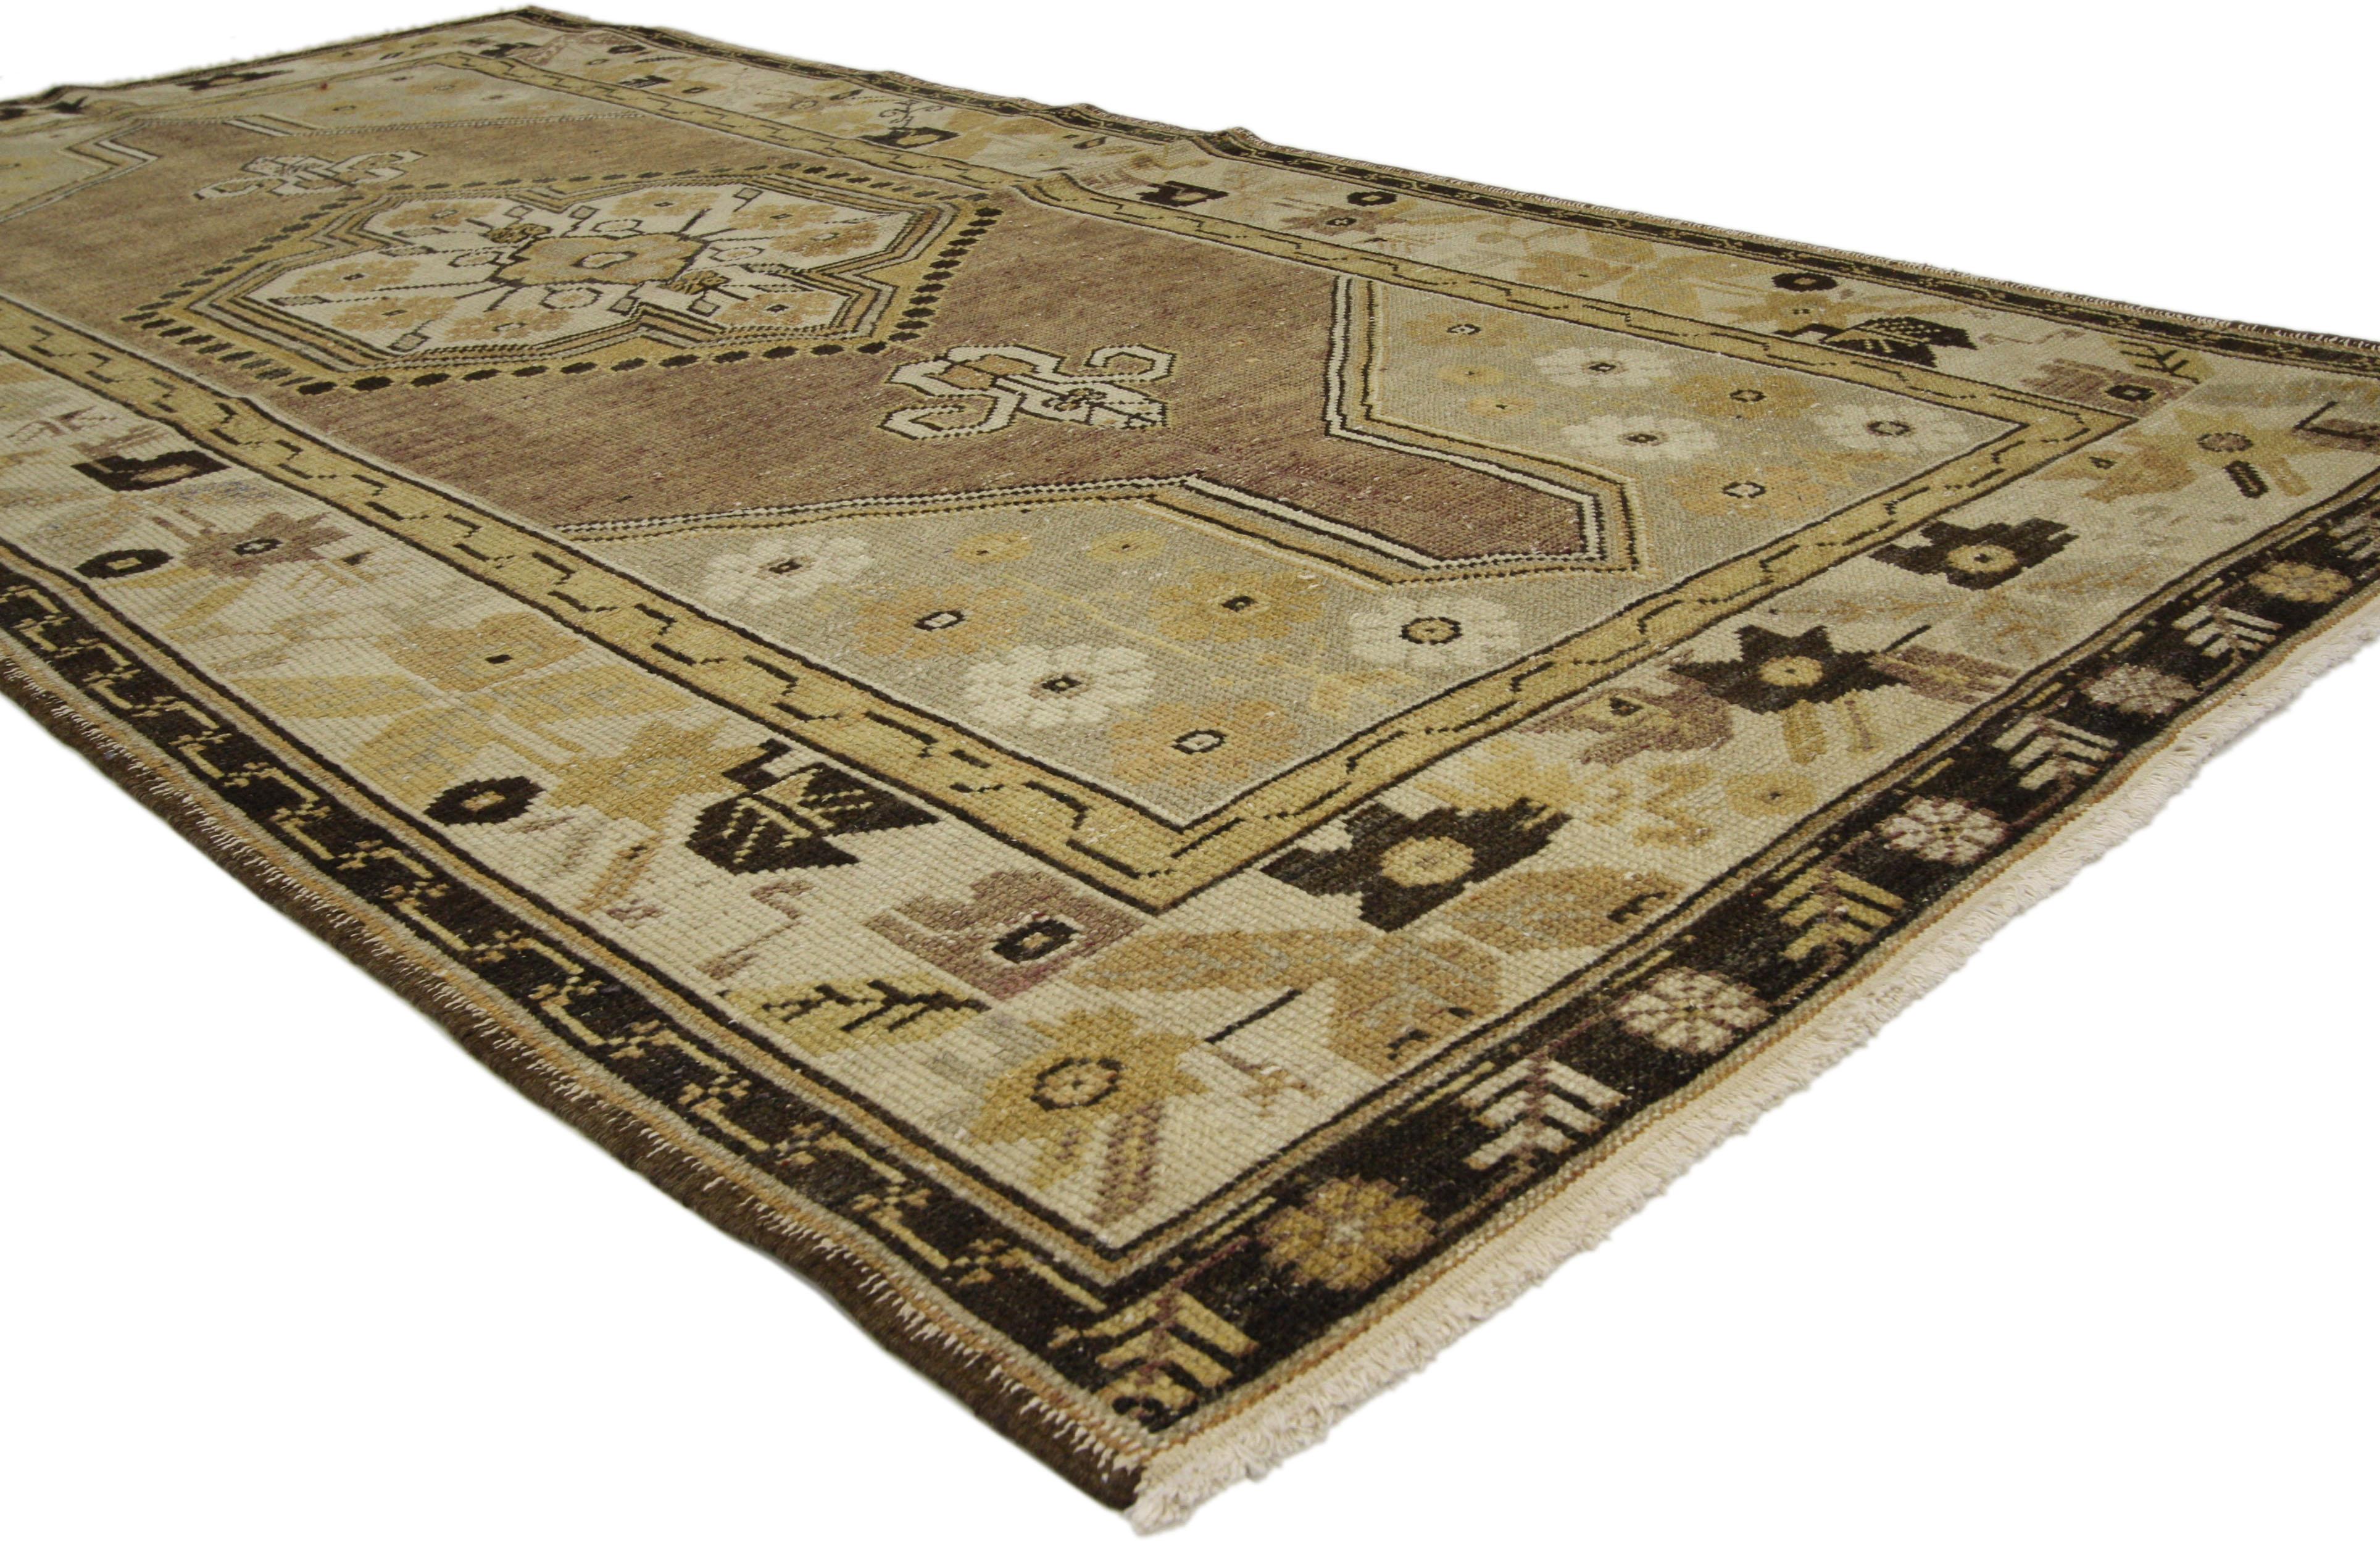 73598 Vintage Turkish Oushak Rug with Rustic American Colonial Style. This hand knotted wool vintage Turkish Oushak rug features a center medallion outlined with pearls and anchored with hands-on-hip finials. It showcases a double mihrab niche and